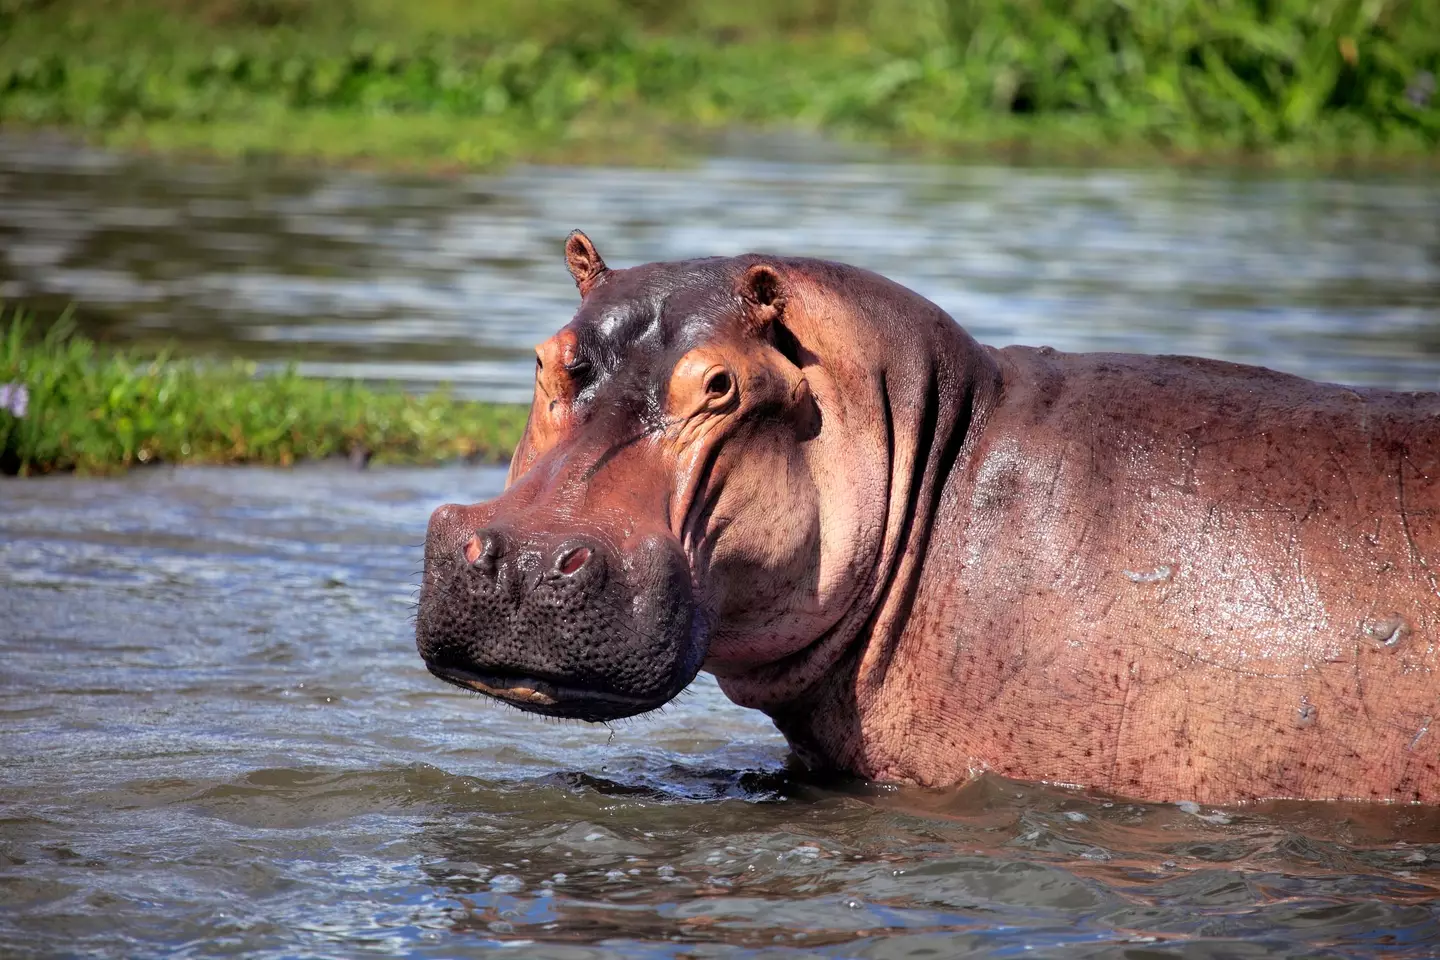 Decades ago Pablo Escobar bought four hippos for his zoo, now there's over 100 of them roaming around.